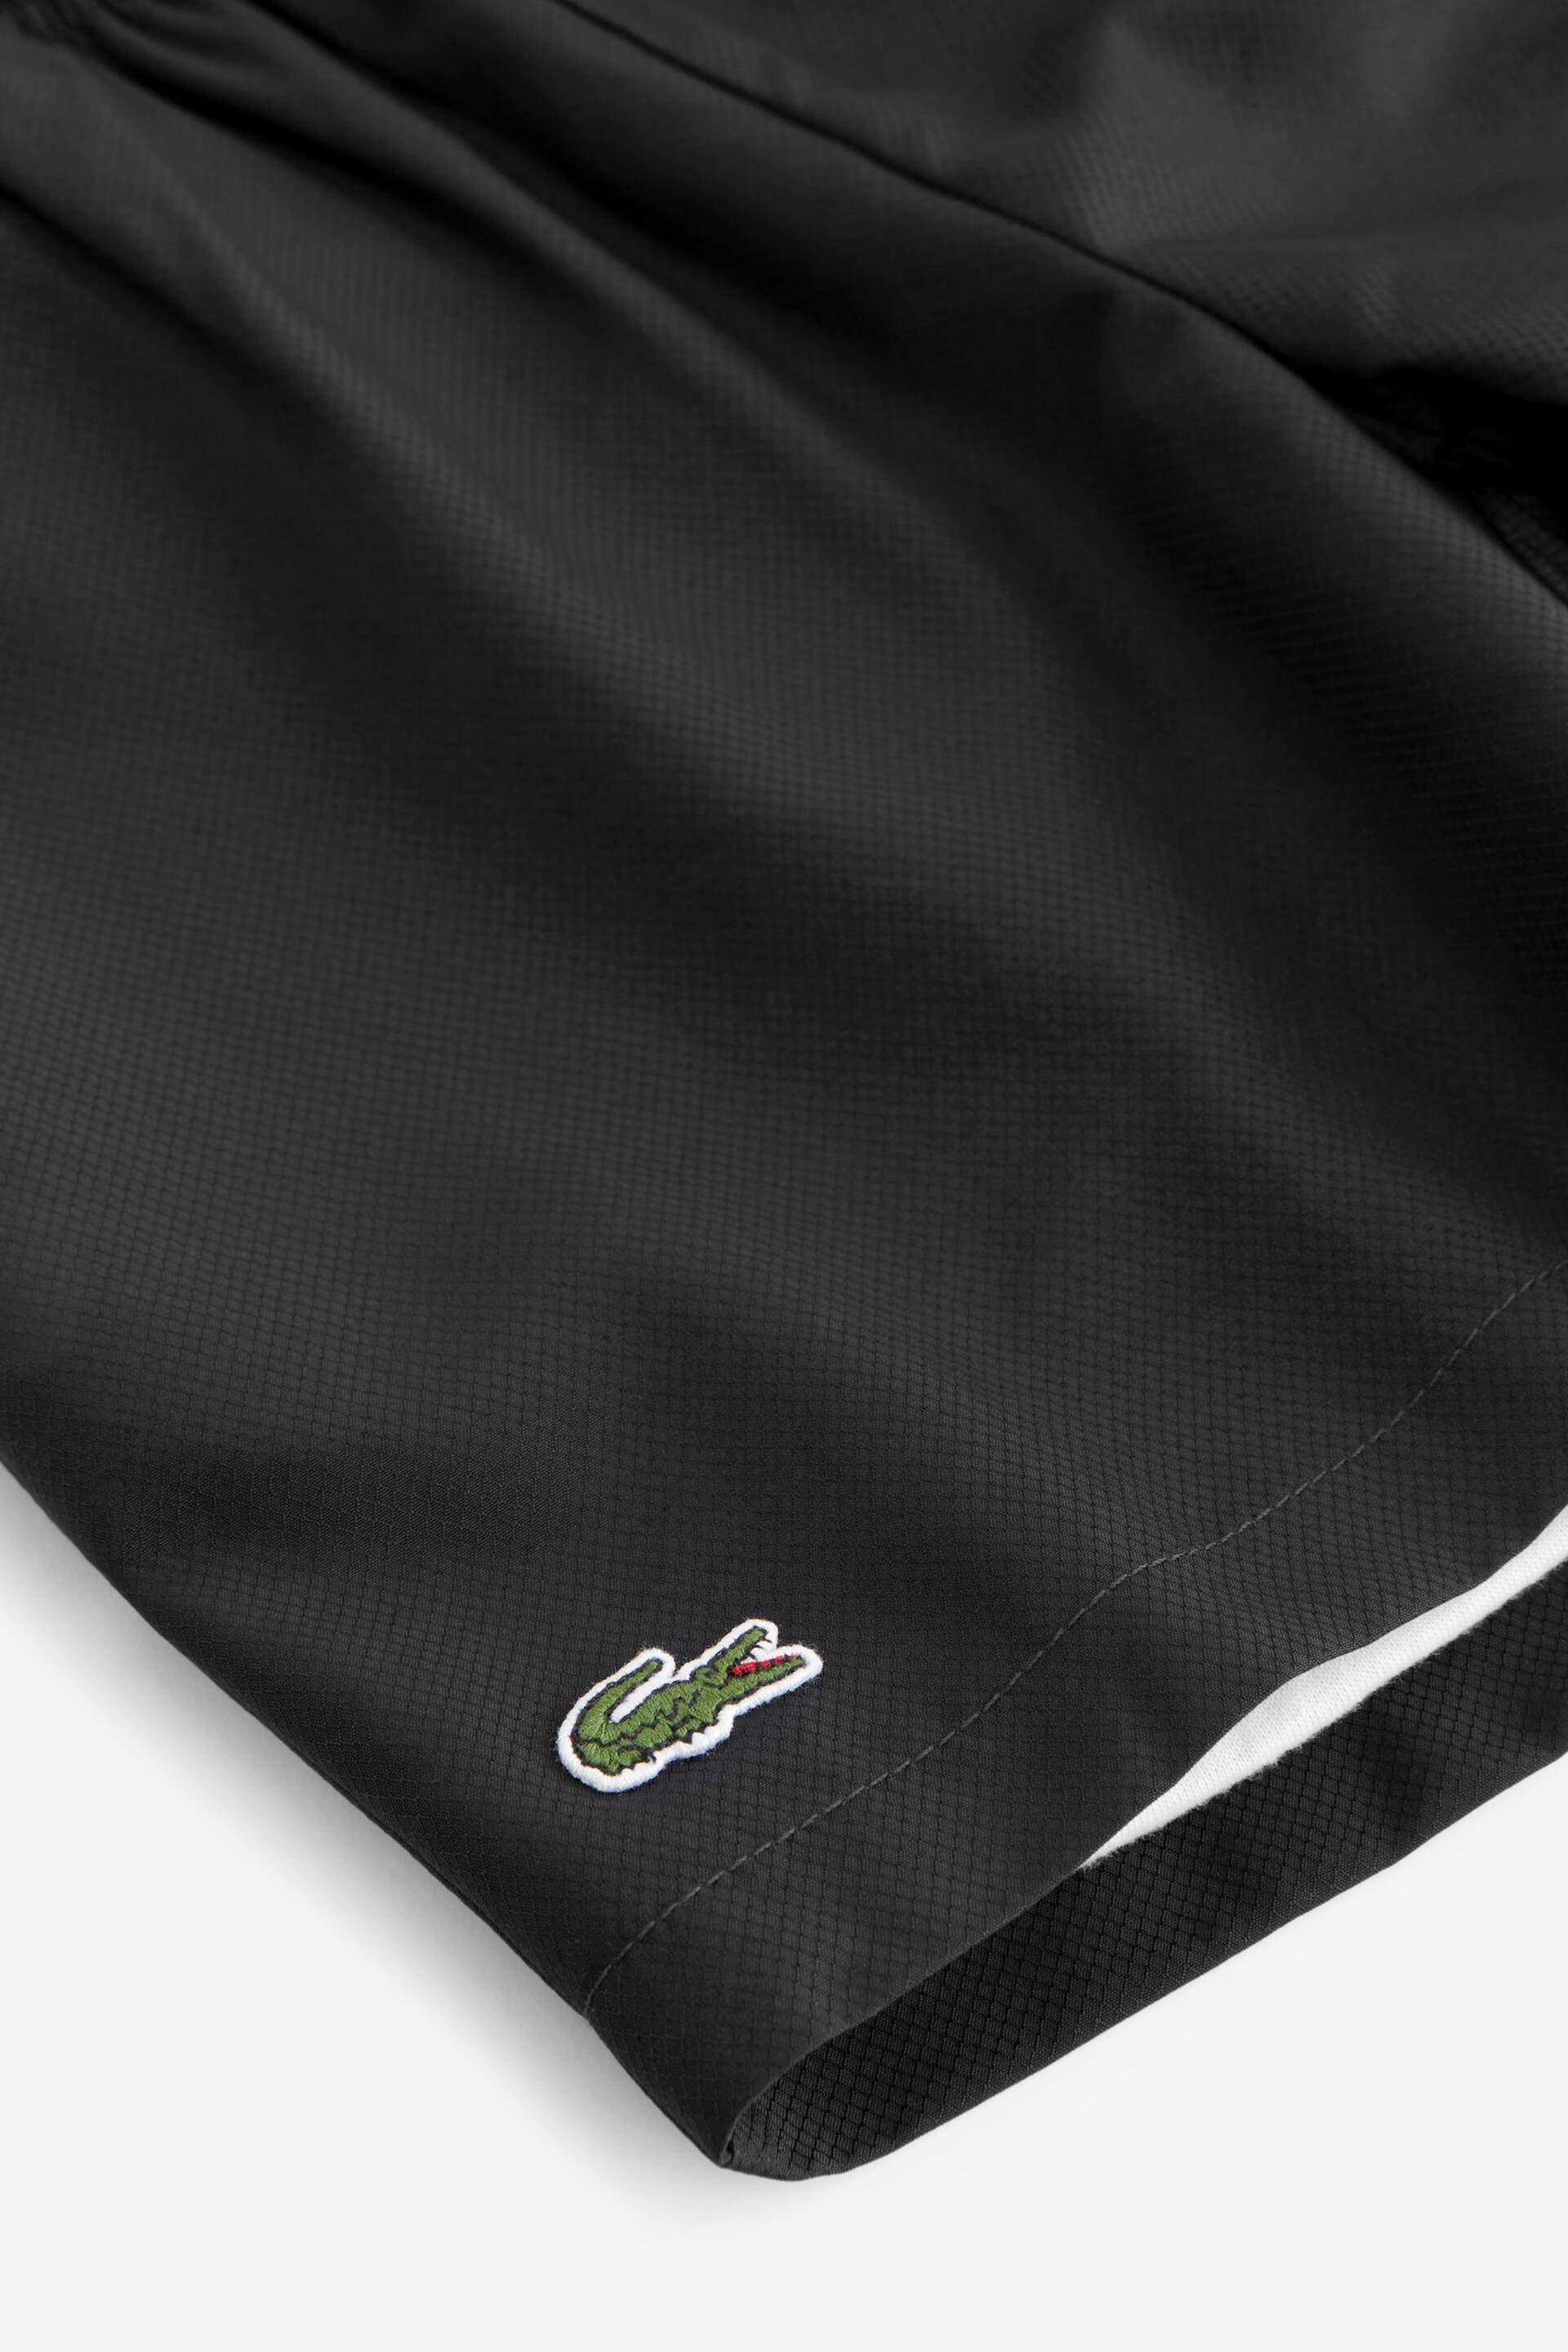 Lacoste Childrens Lightweight Performance Shorts - Image 5 of 5